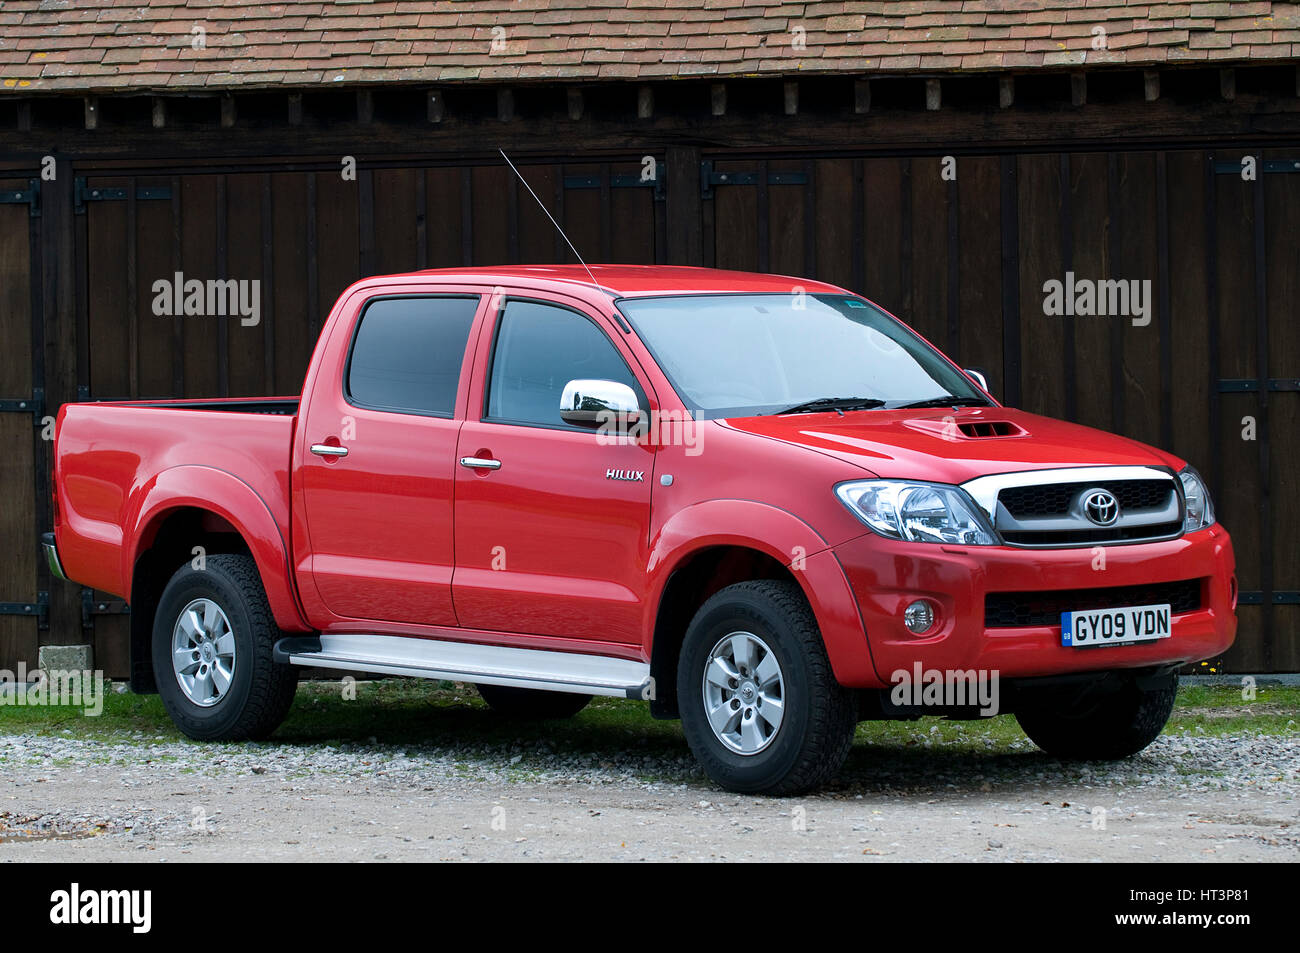 2009 Toyota HiLux pick up truck Artist: Unknown. Stock Photo